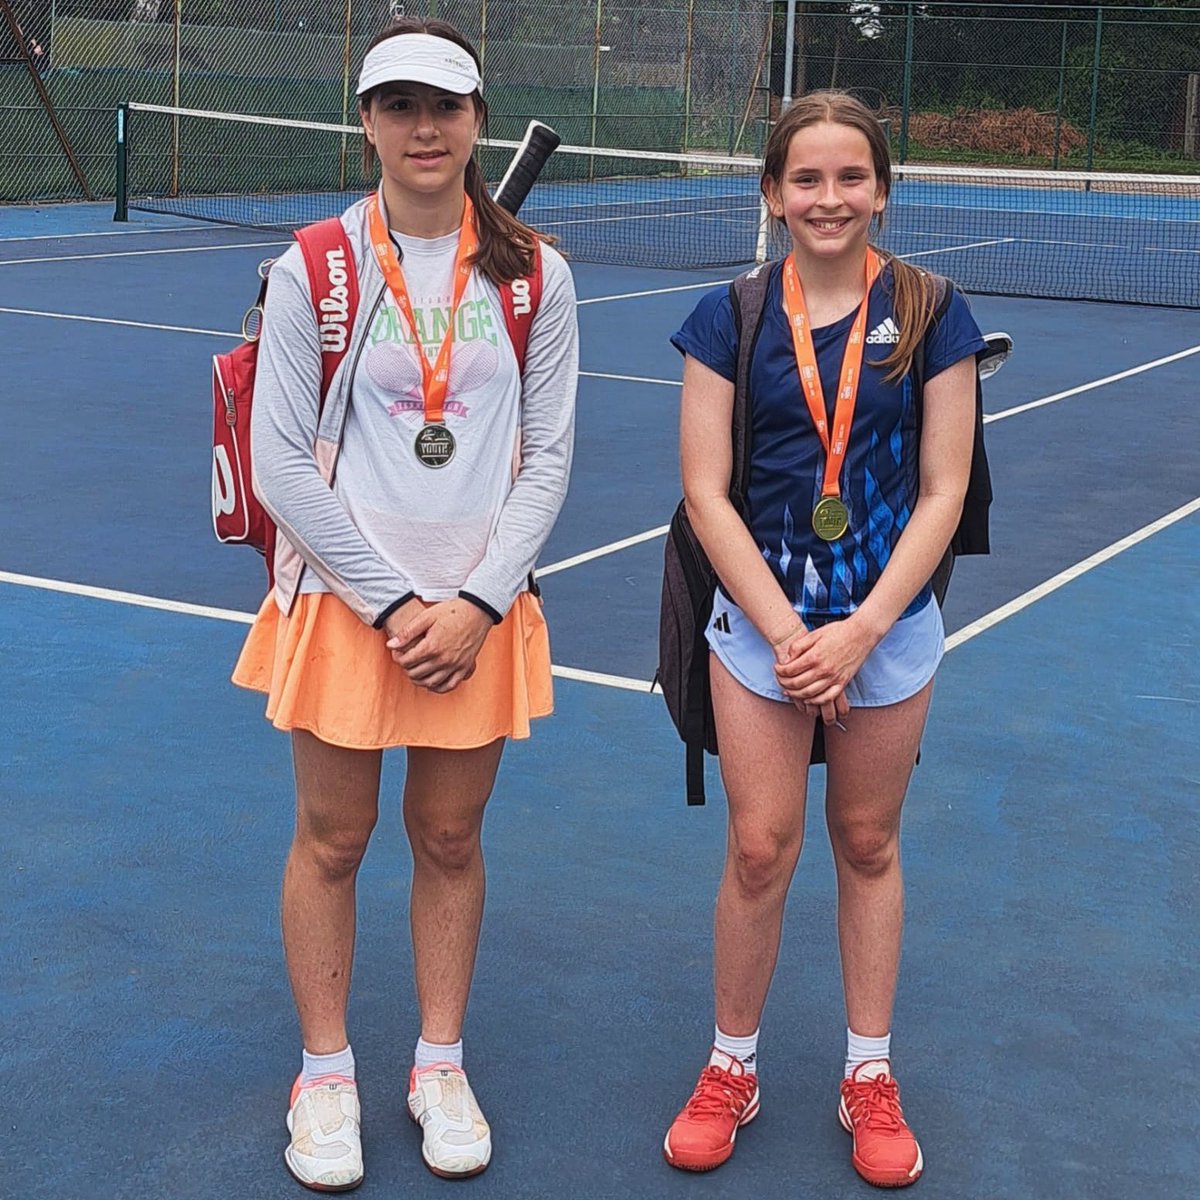 Great effort from Katie, who has shown really good commitment to her tennis recently - finalist in the 12U girls singles at the Broxbourne Central & East Tour Grade 5 👍🥈